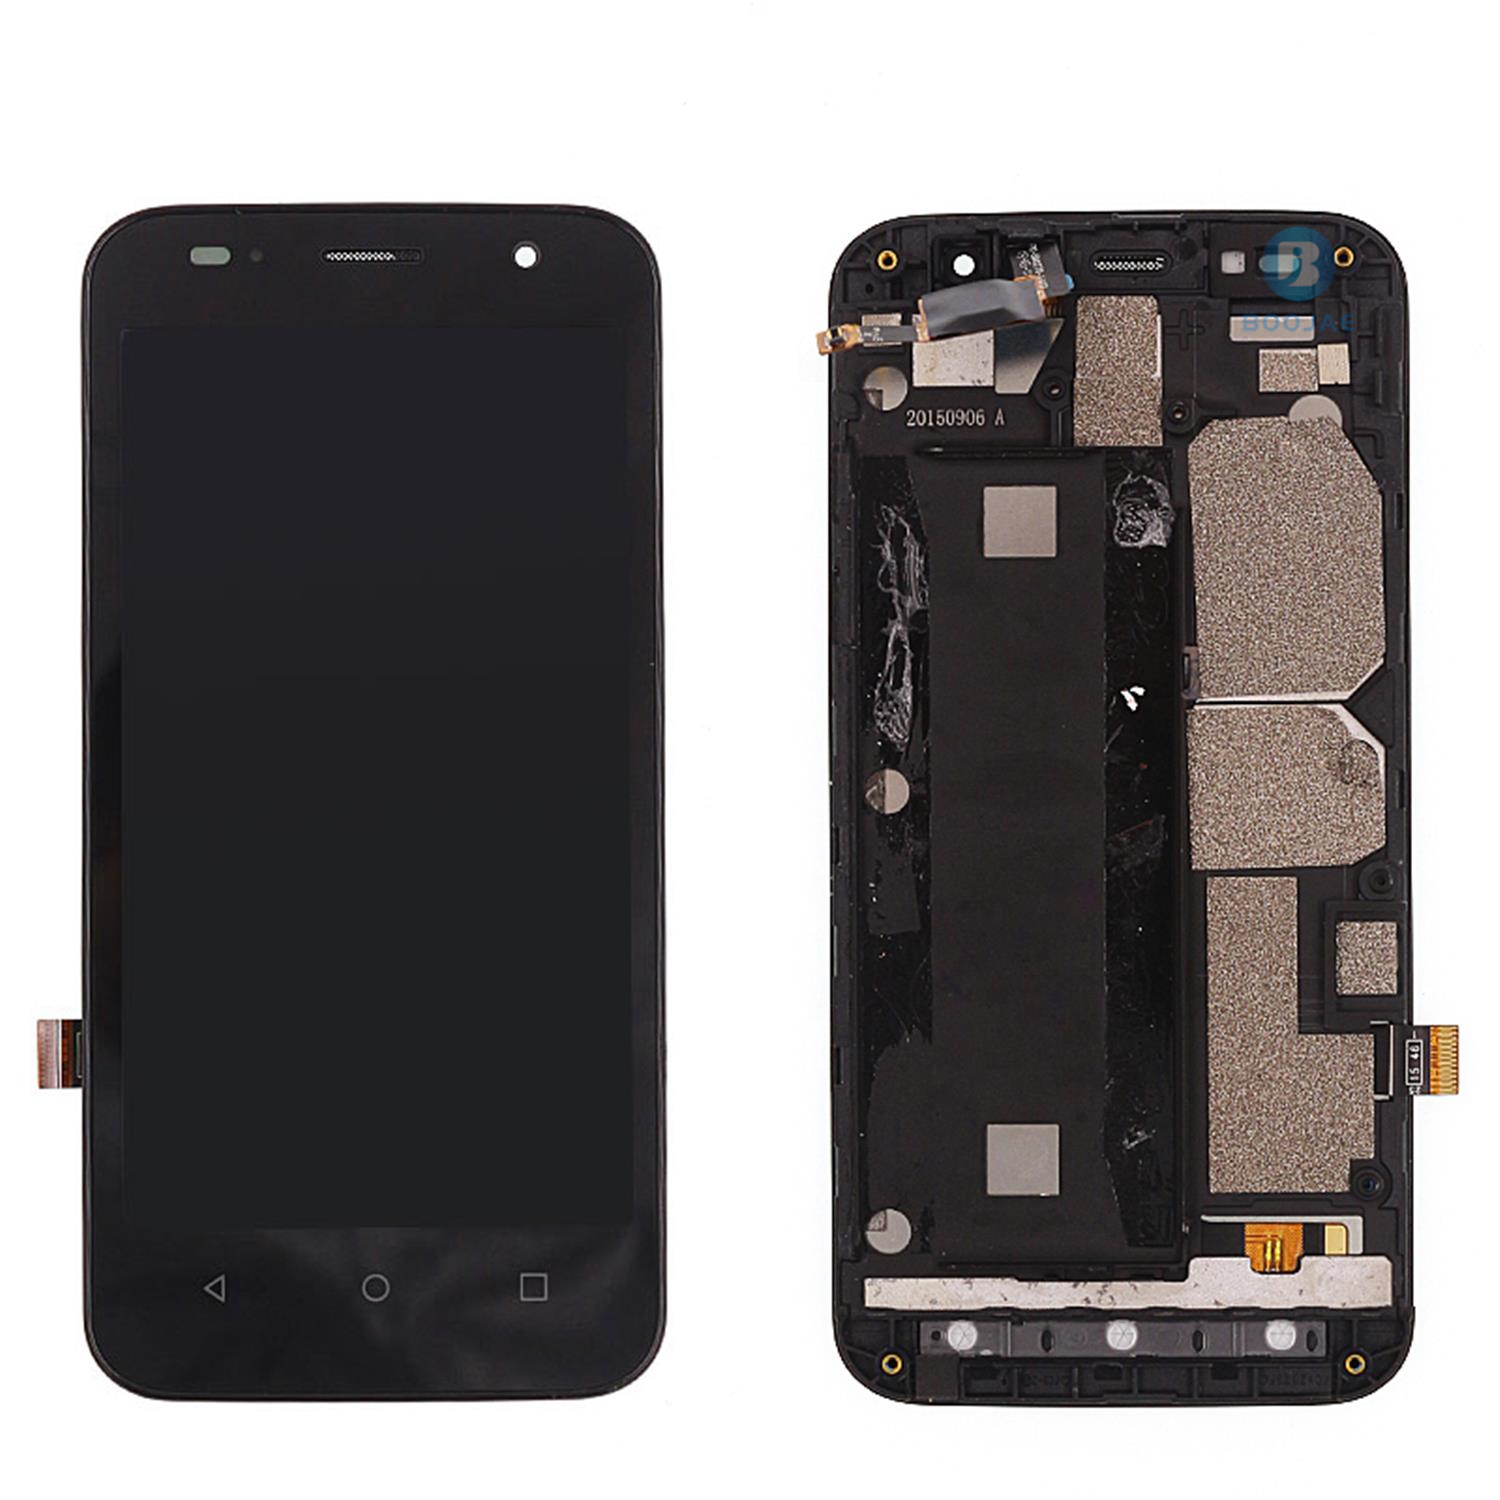 ZTE Z812 LCD Screen Display, Lcd Assembly Replacement